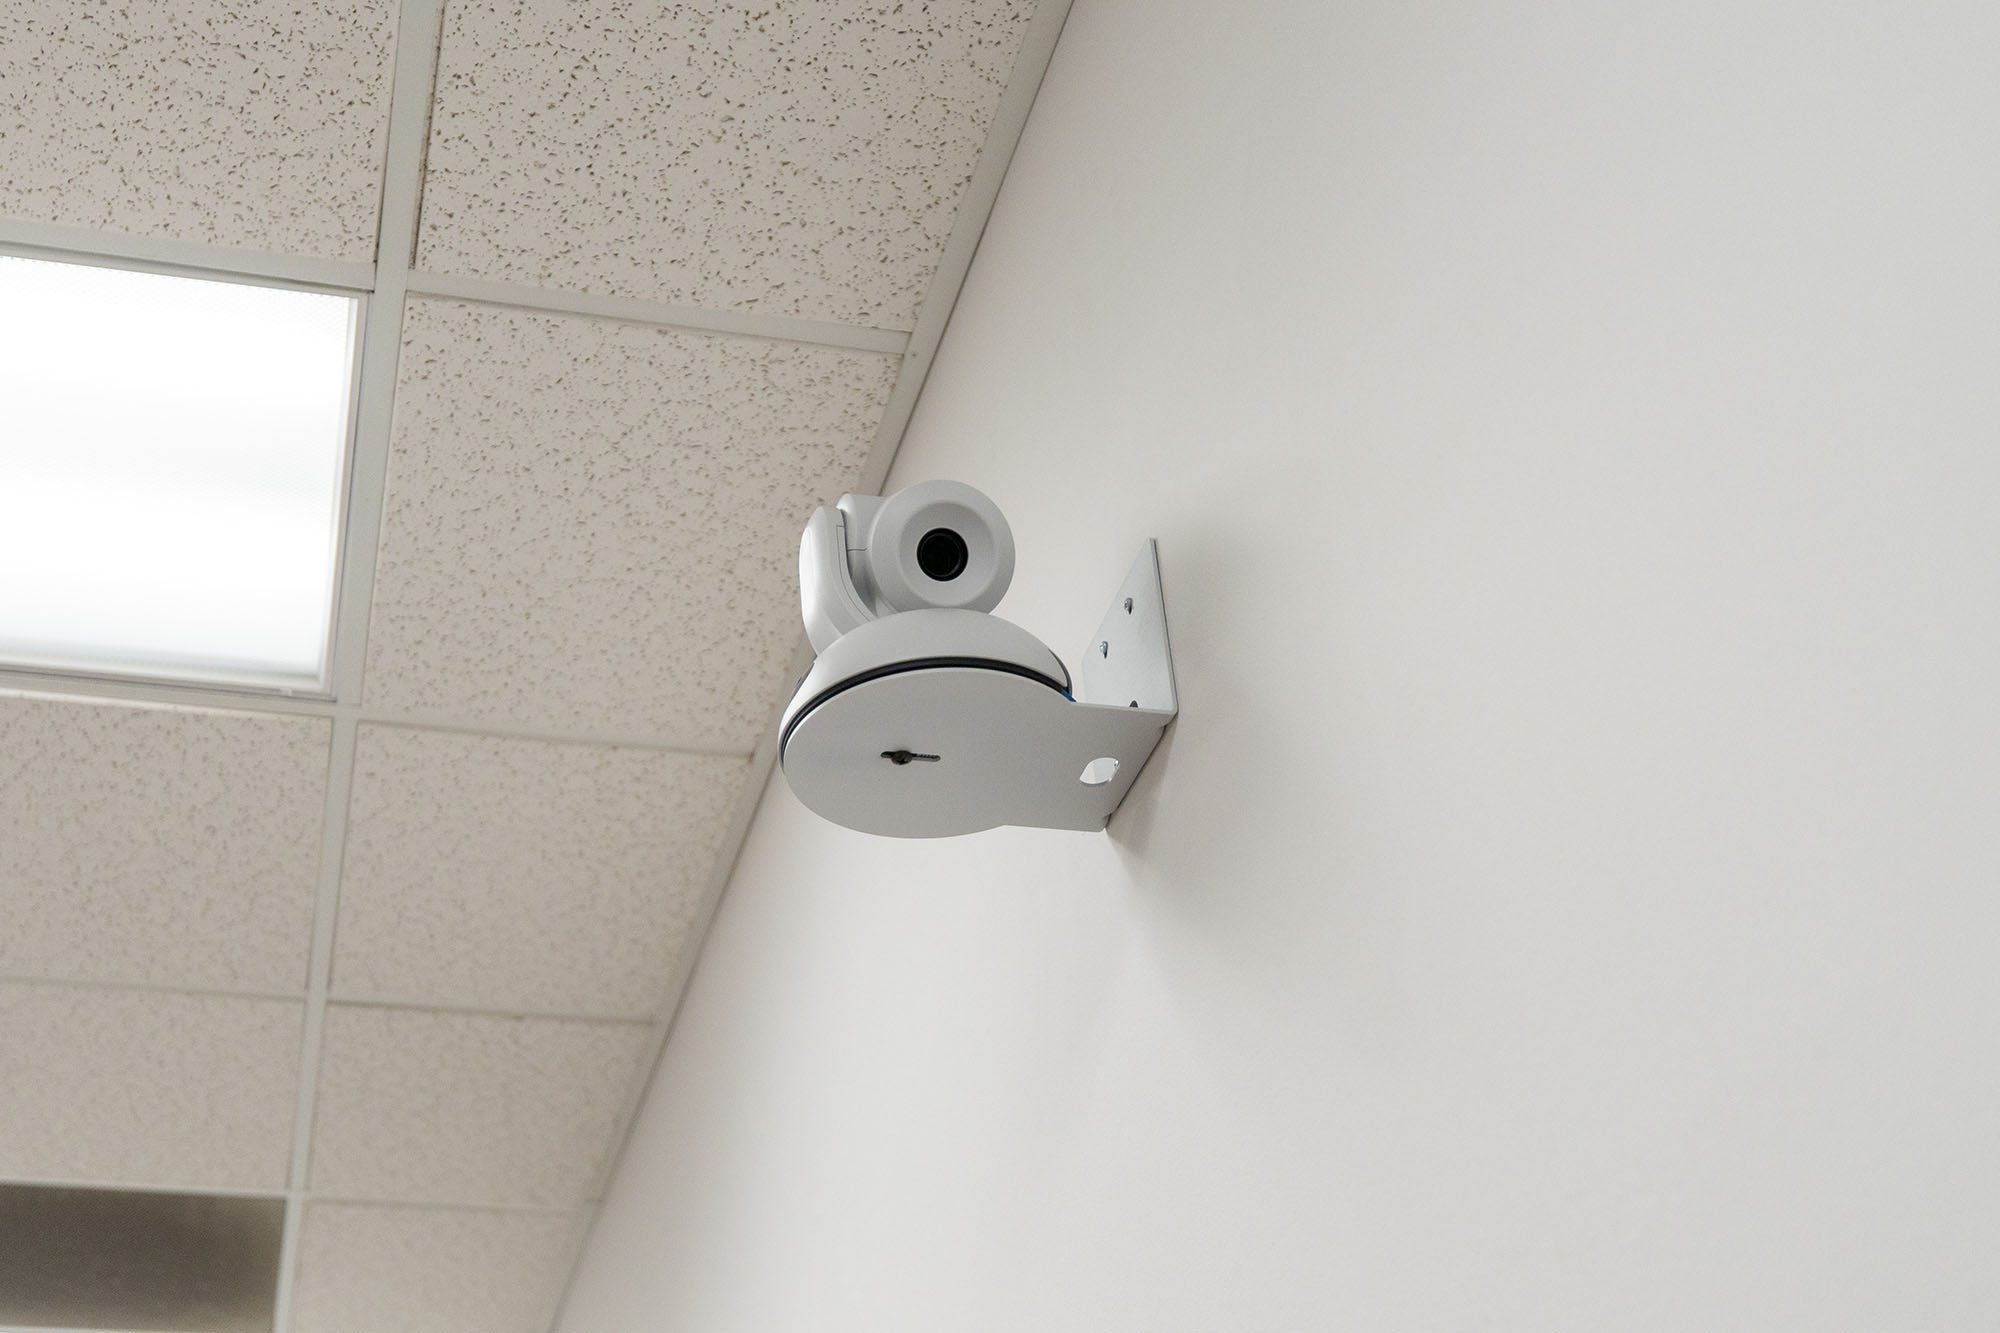 A lecture capture camera mounted on a white wall.